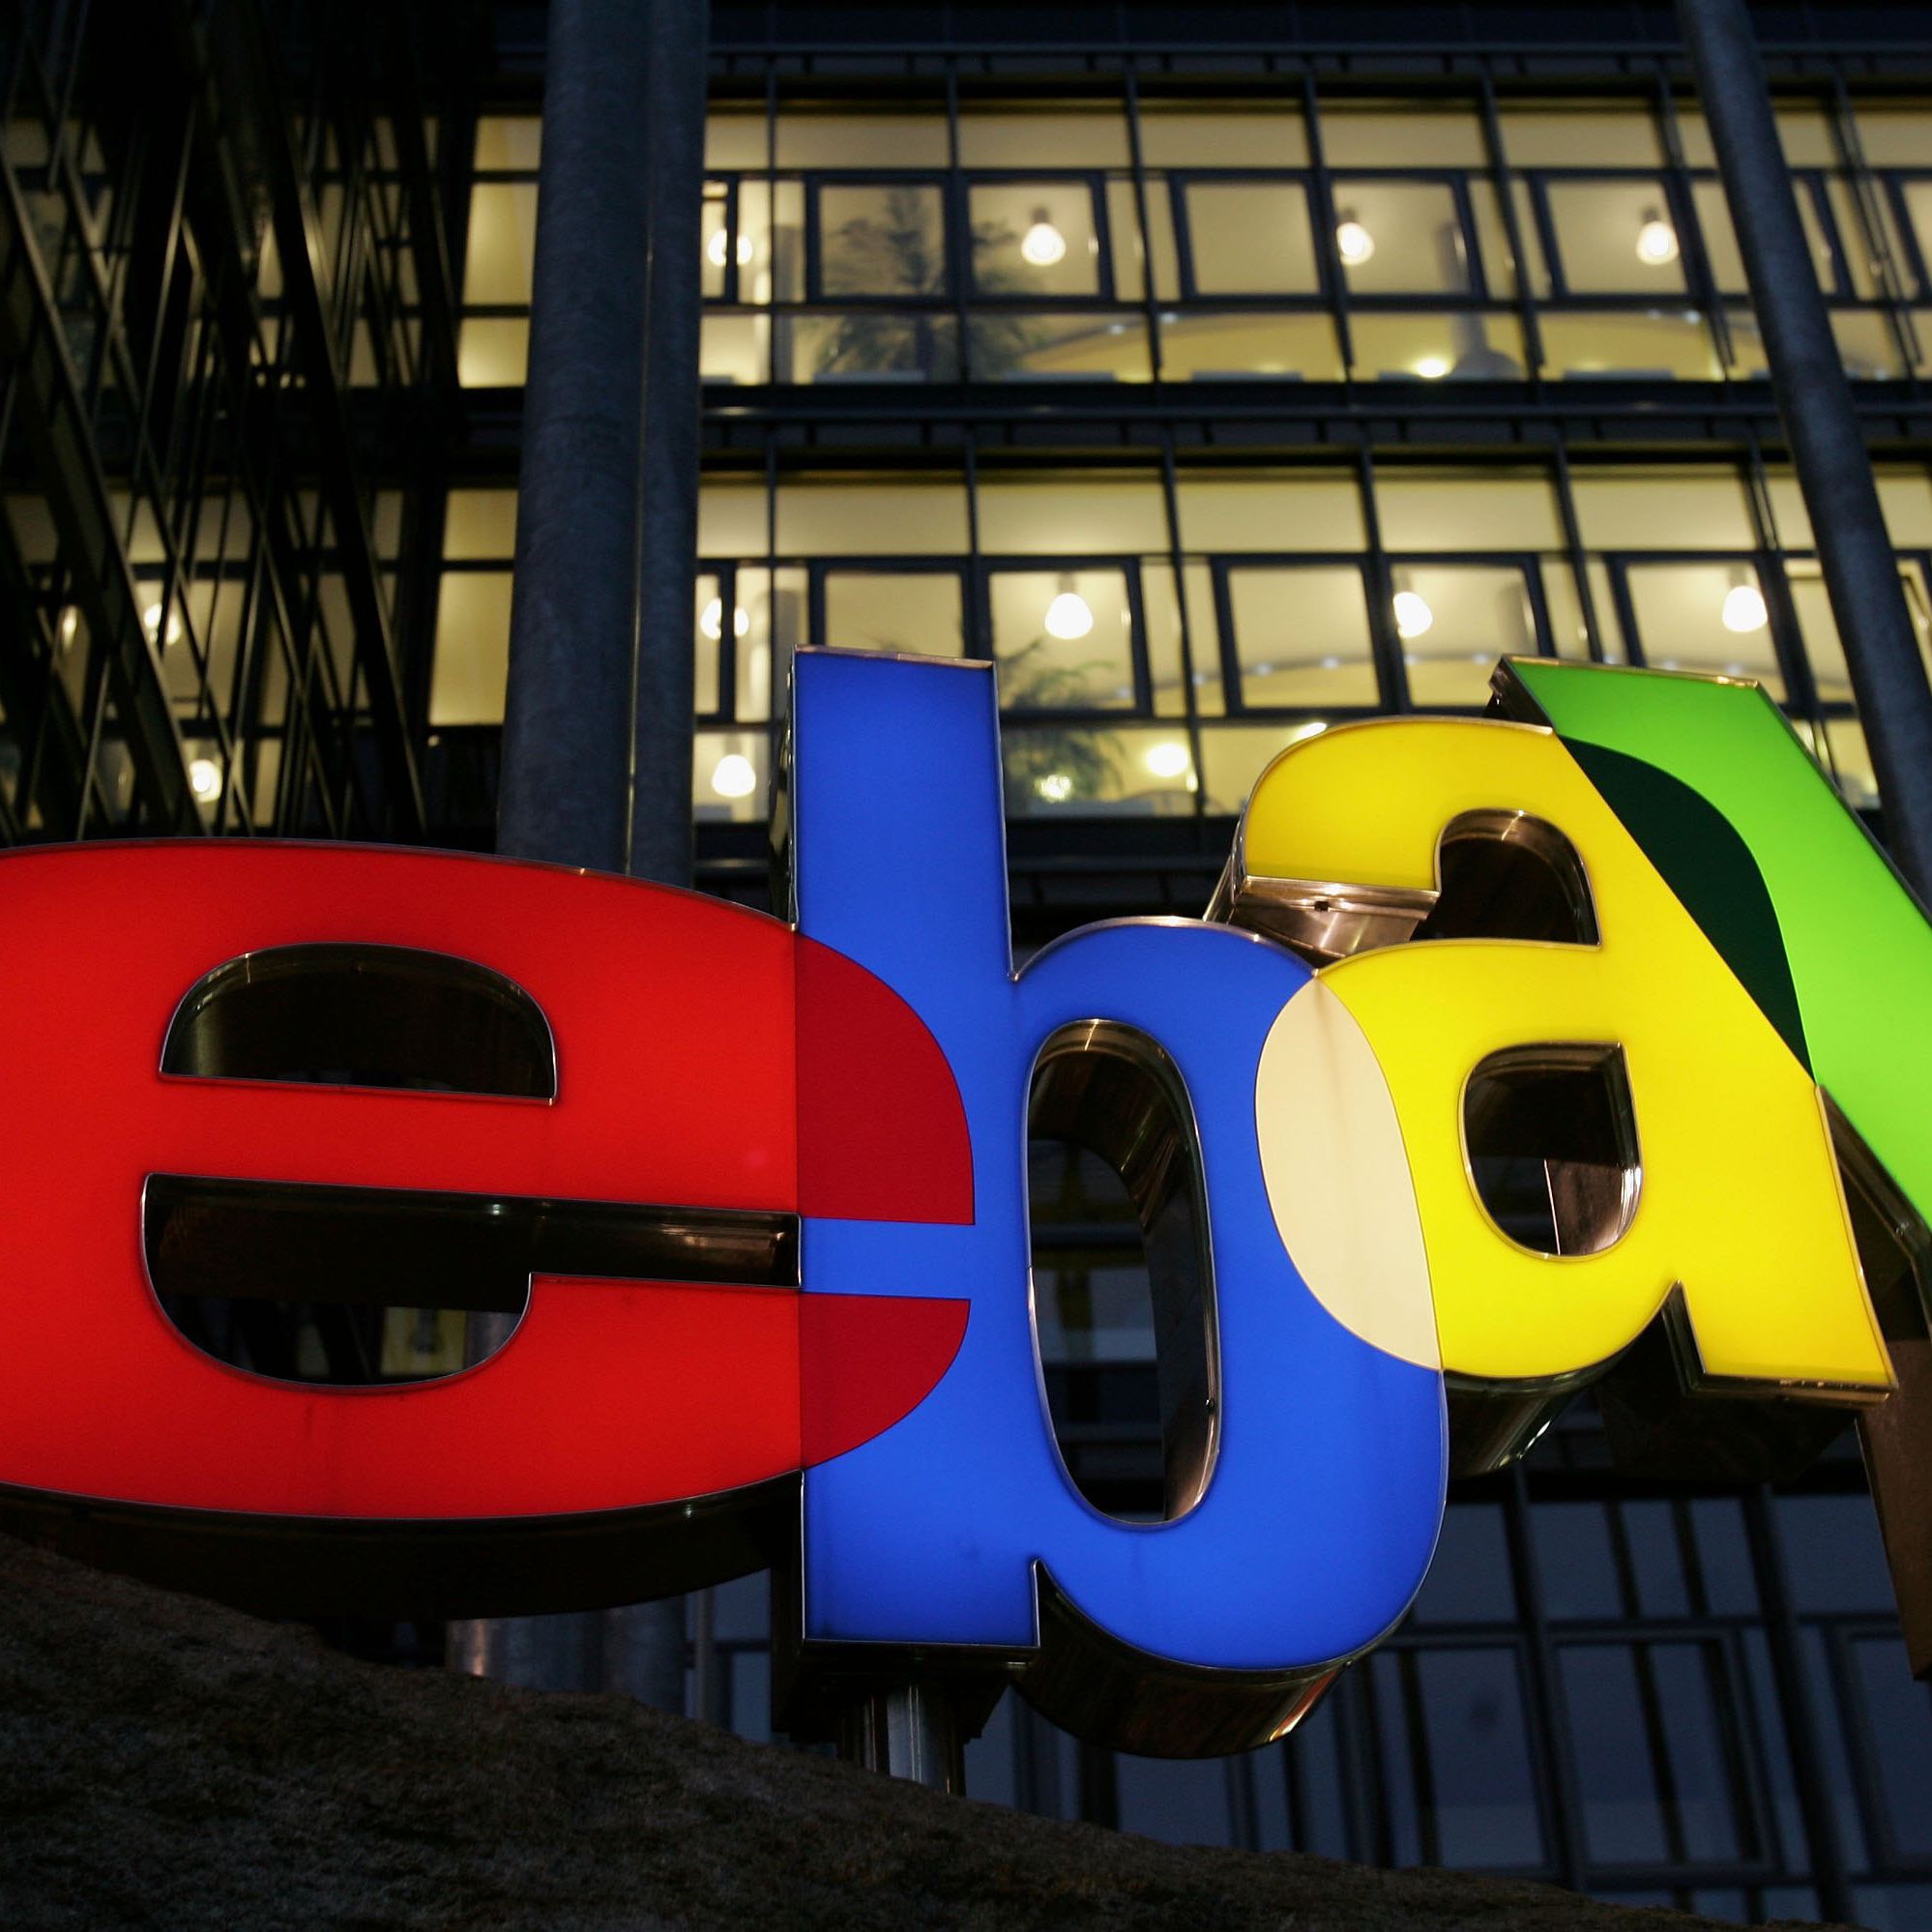 What to Do if My eBay Seller Account Is Blocked